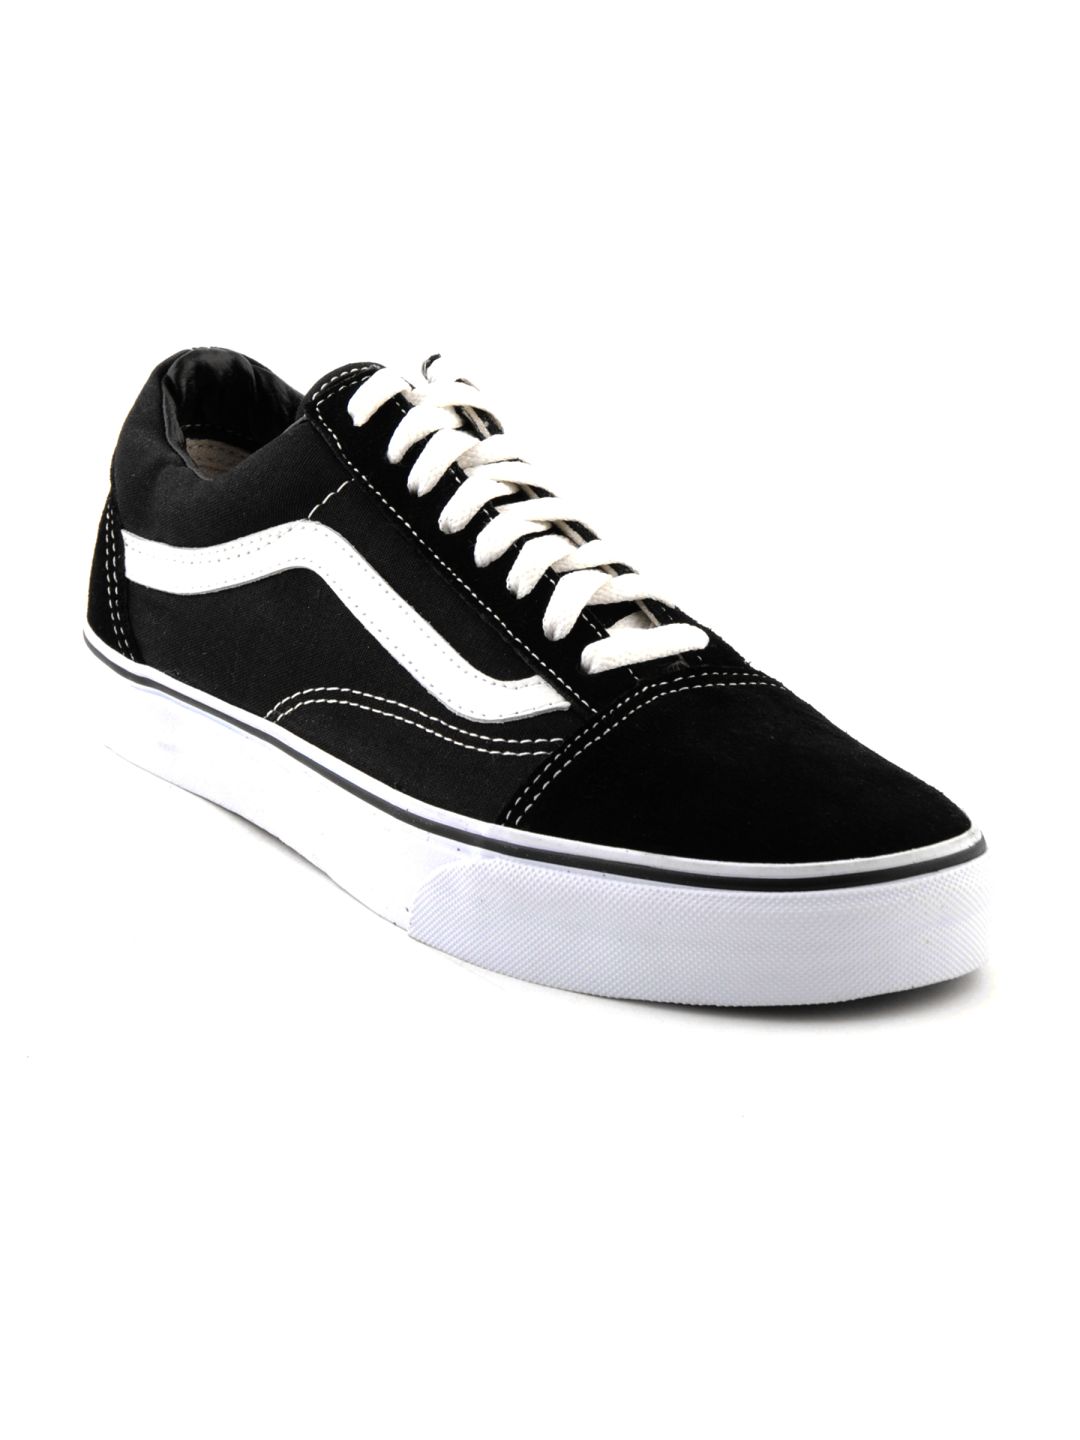 cheapest place to buy vans shoes